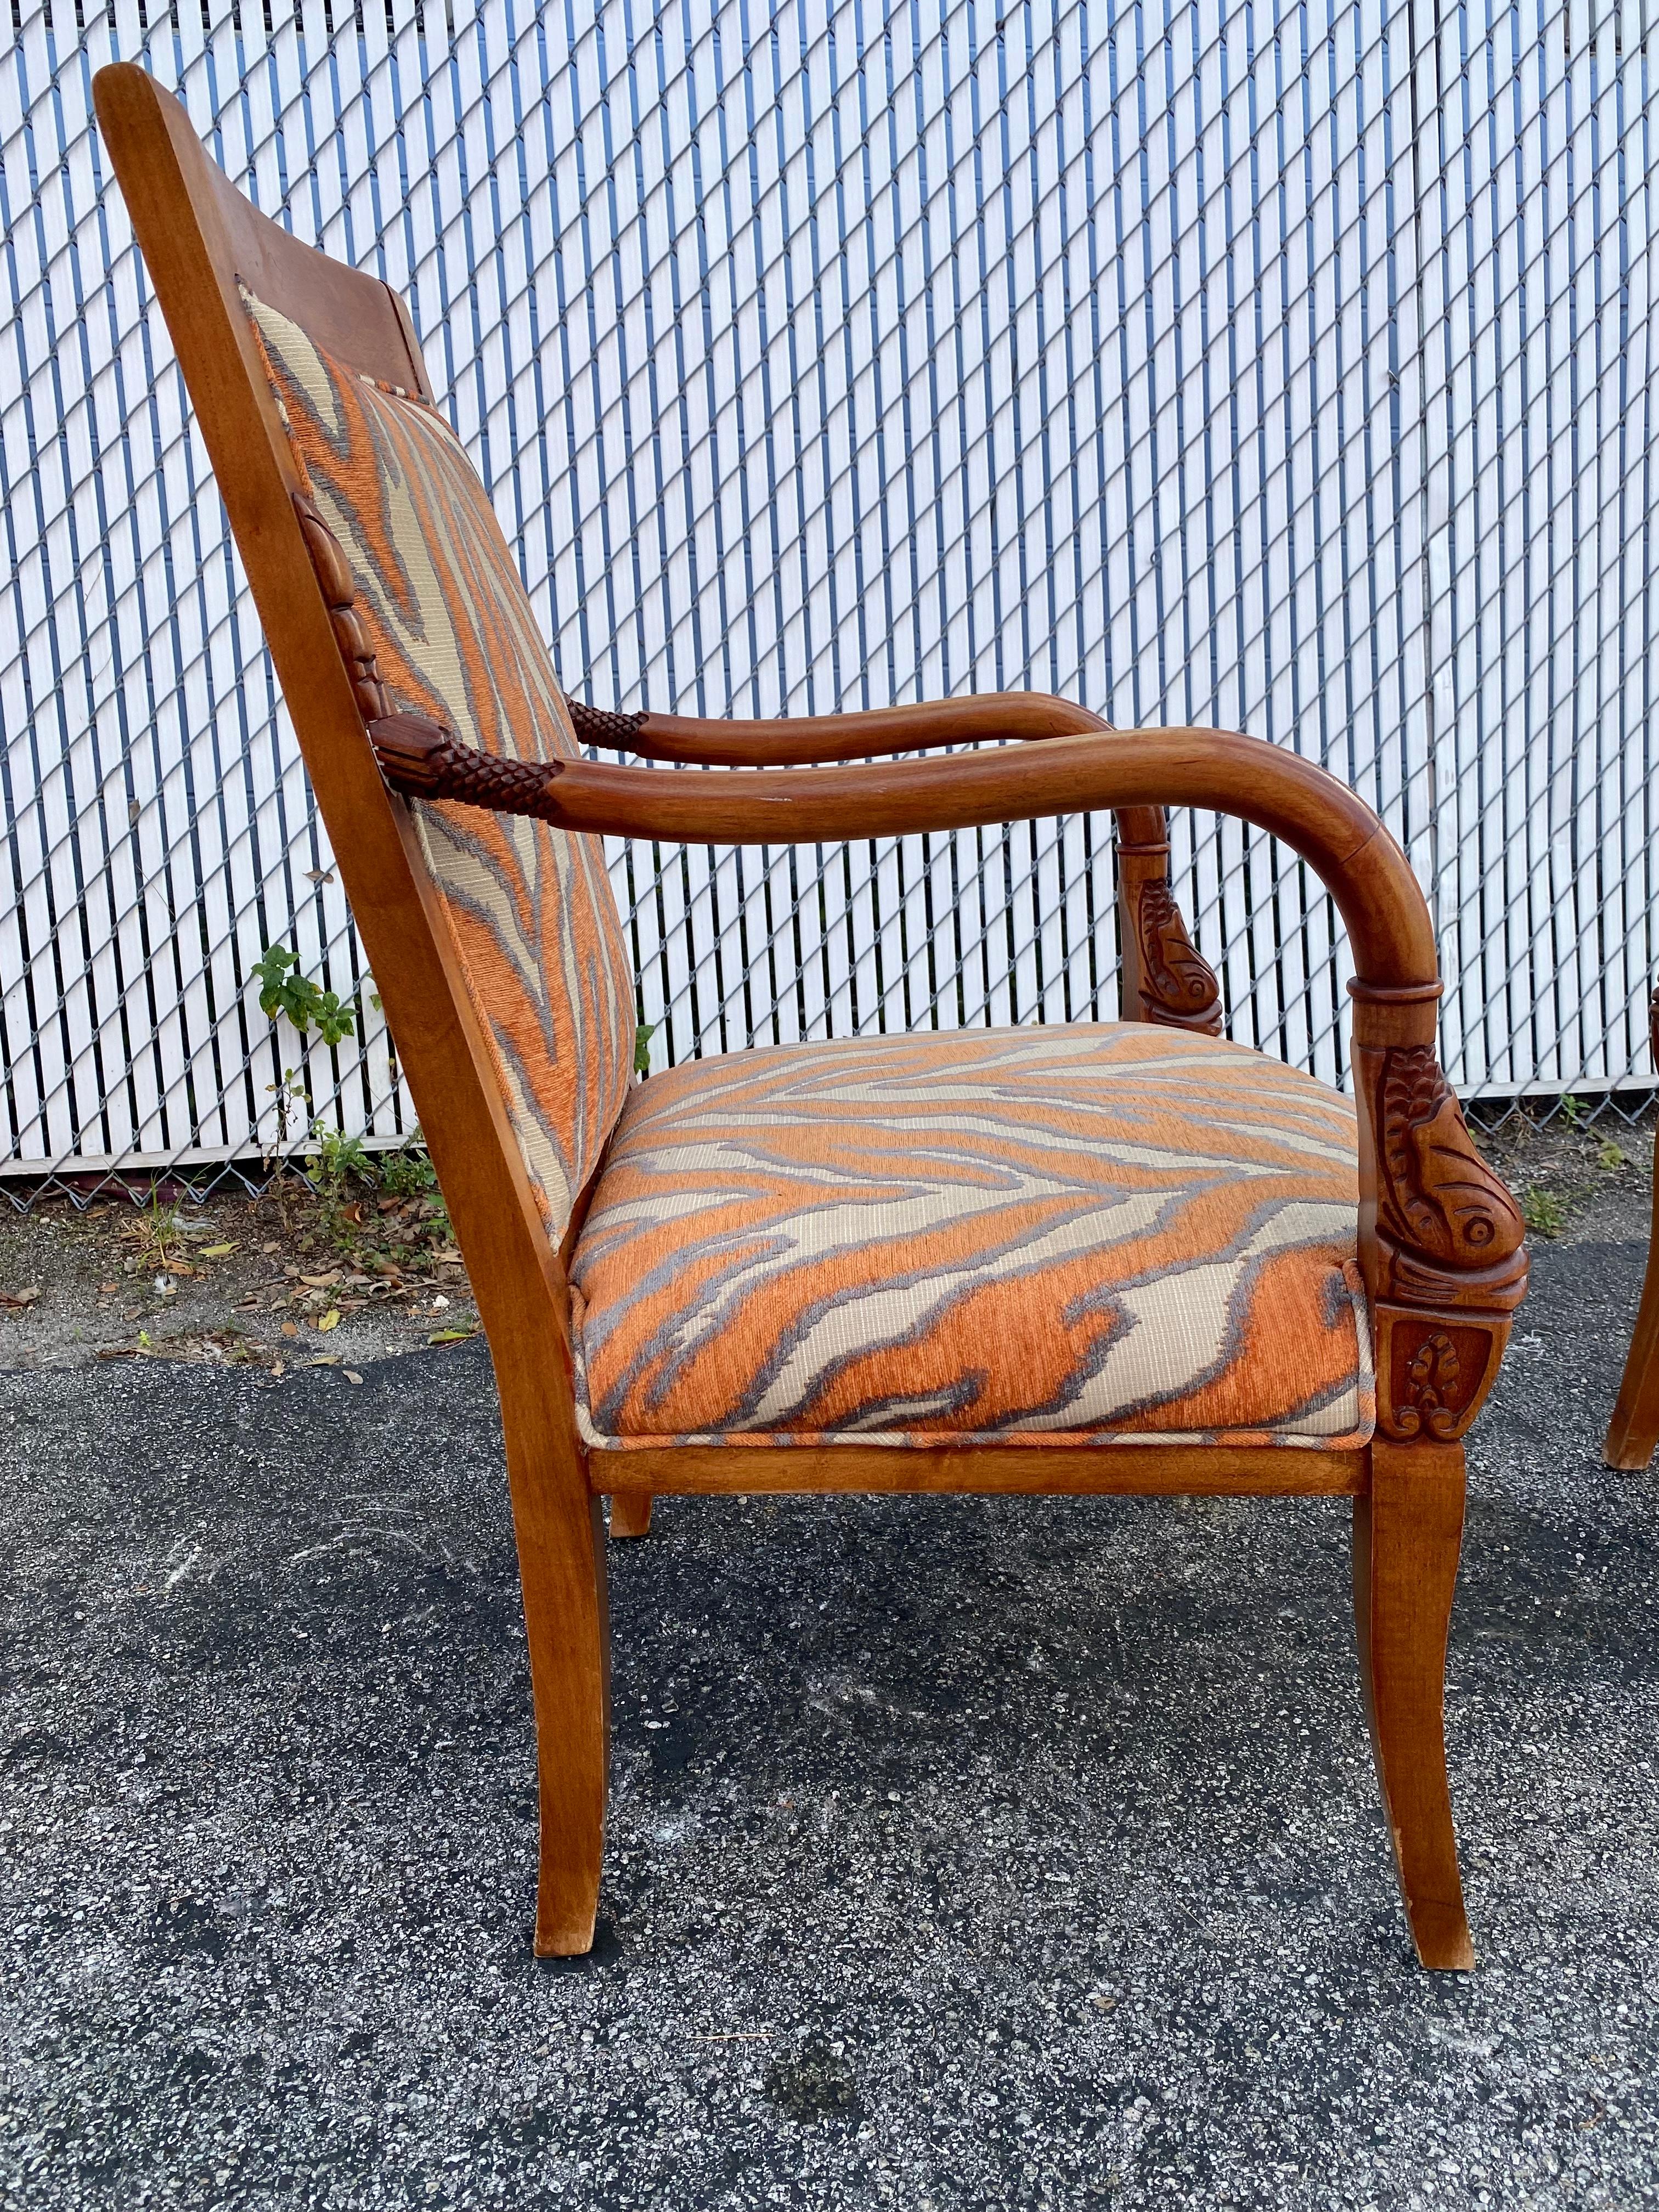 1970s Carved Wood Gold Fish Zebra Bentwood Chairs and Ottoman, Set of 3 For Sale 9